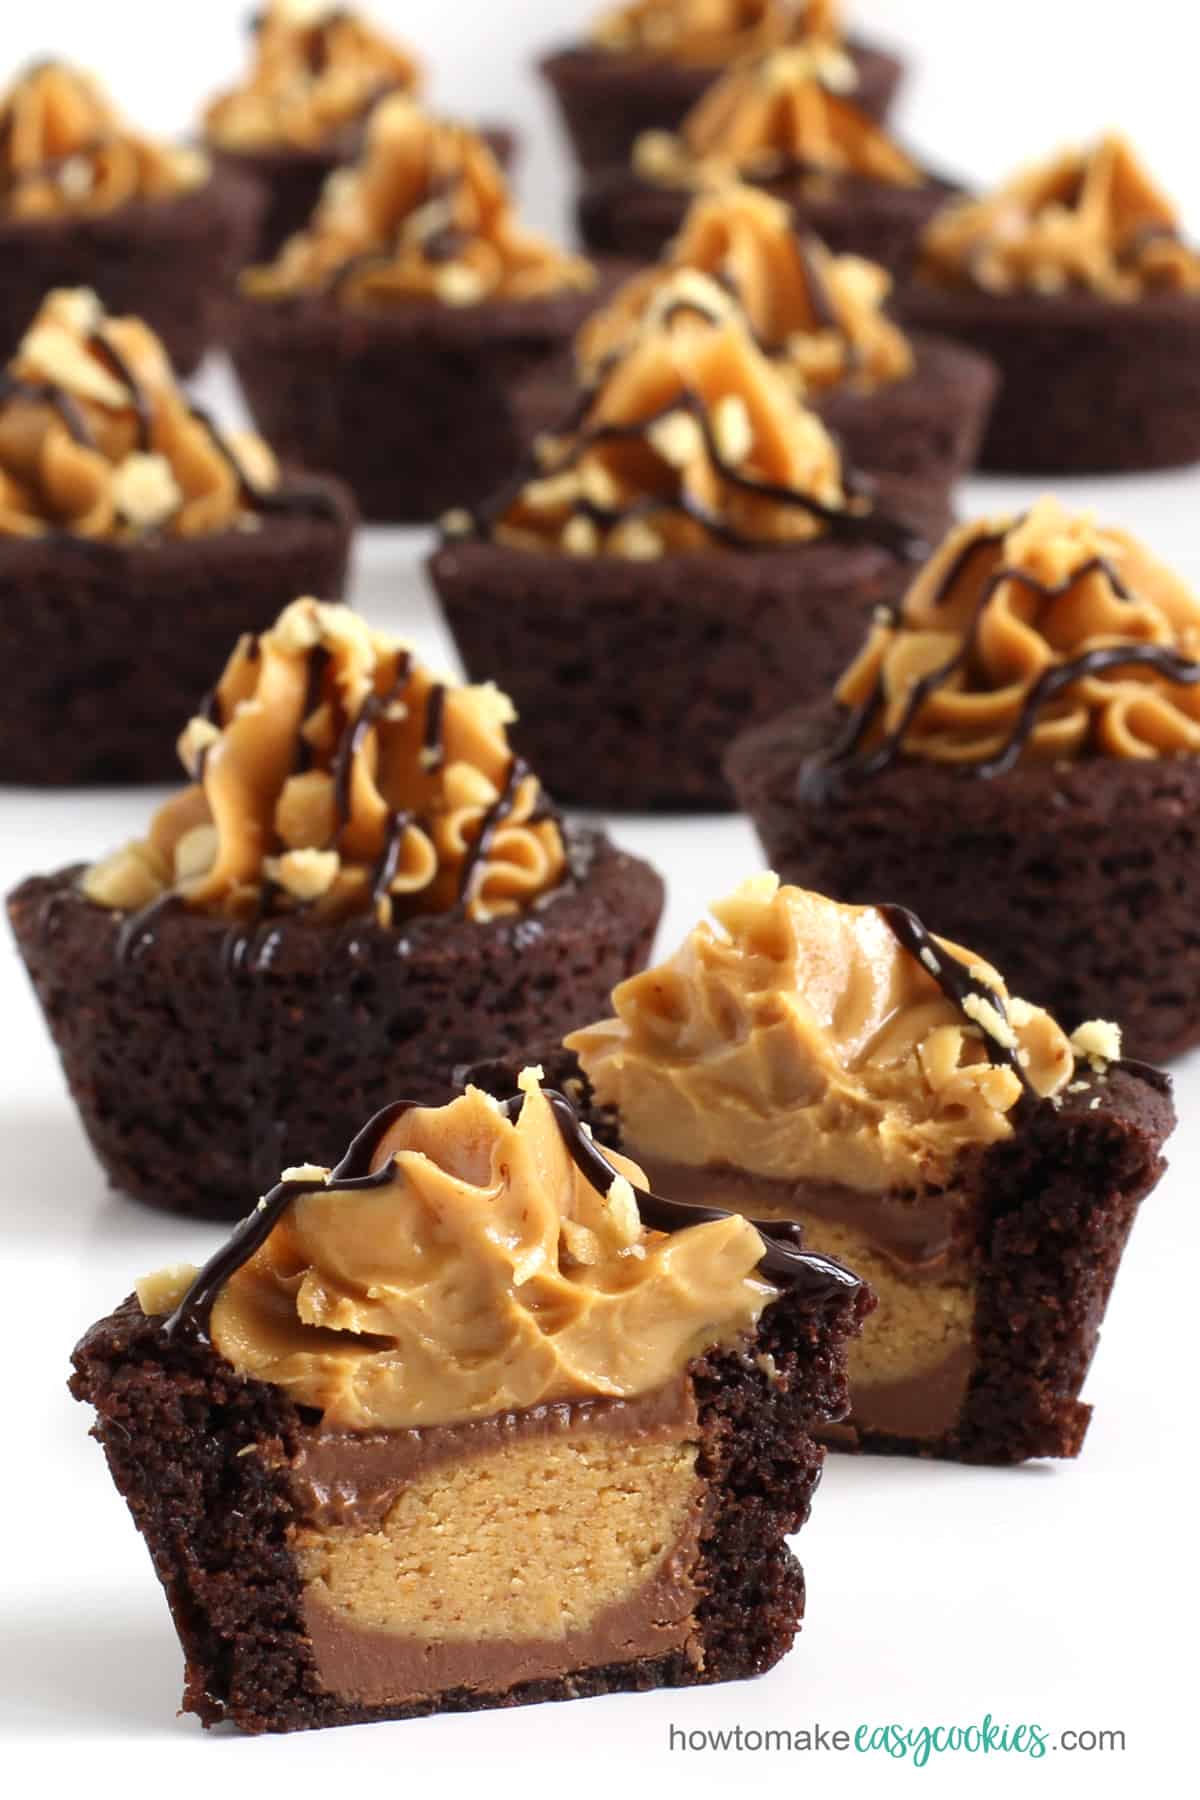 Reese's peanut butter cookie cups stuffed with a Reese's cup and topped with peanut butter, chocolate sauce, and peanuts